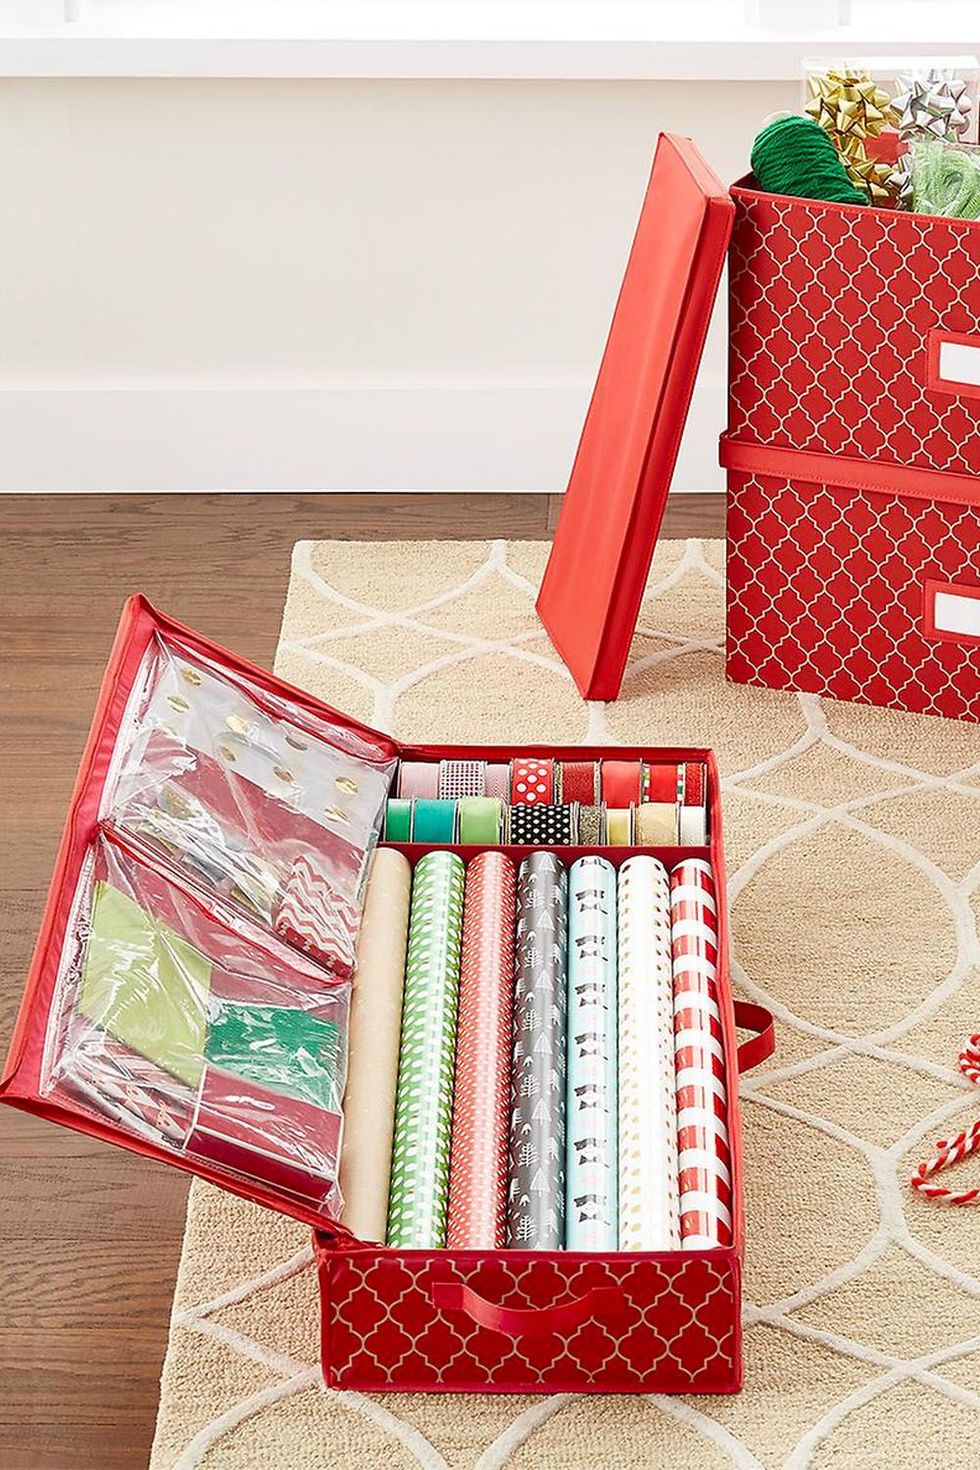 15 BEST Wrapping Paper Storage Ideas